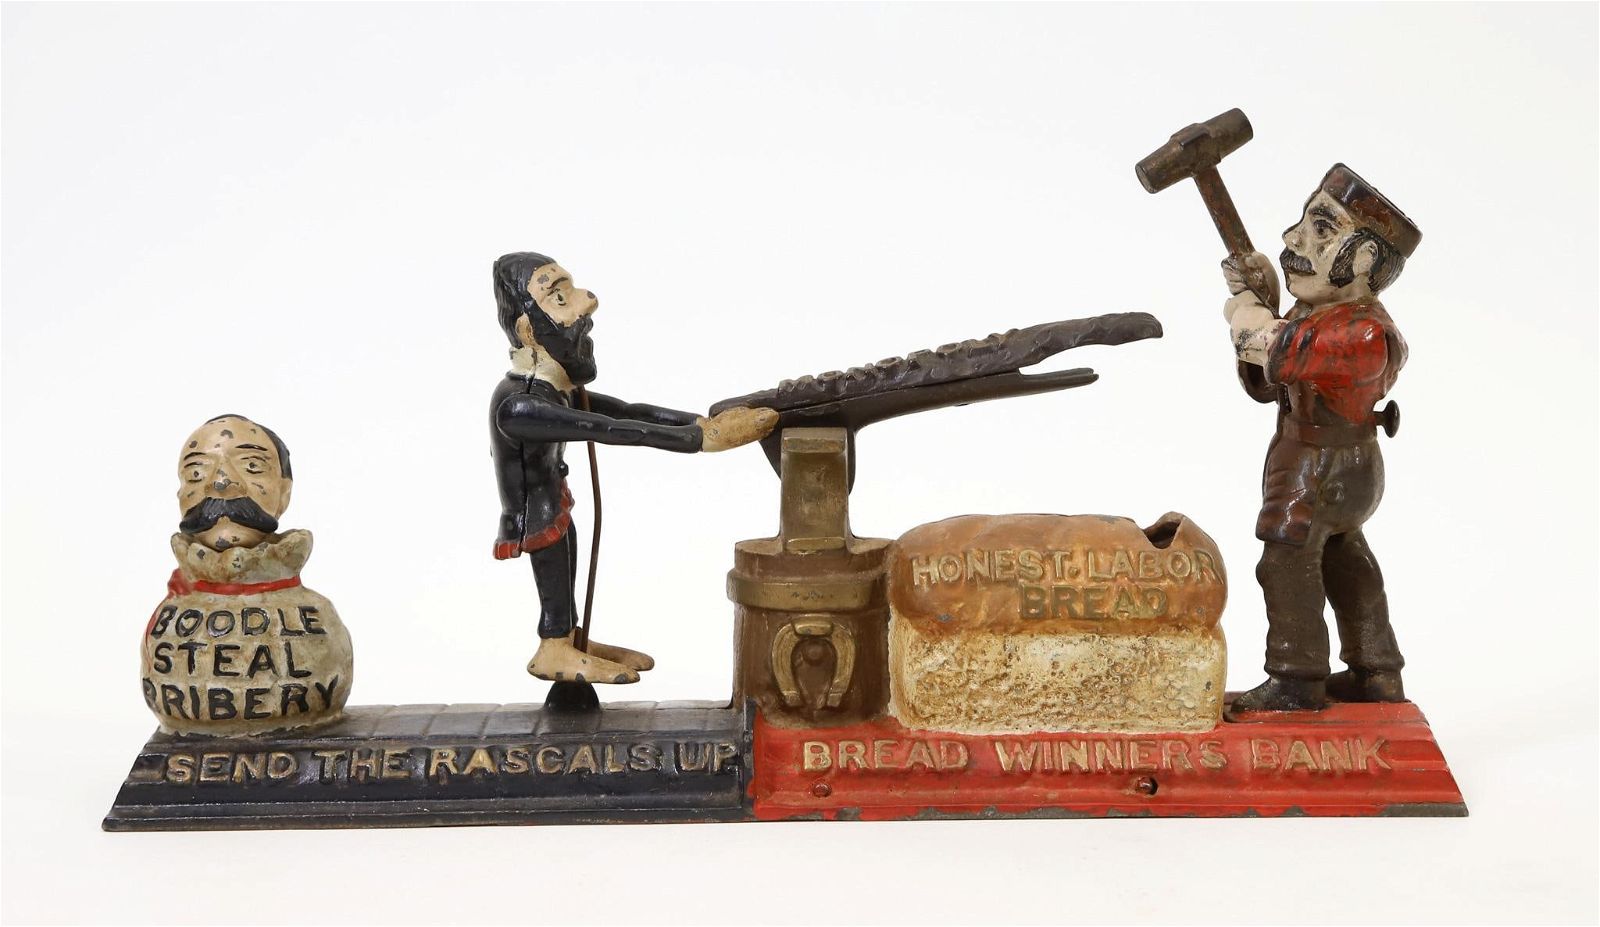 Circa-1886 J & E Stevens Bread Winners cast iron mechanical bank, which sold for $8,960 at Alderfer Auction.